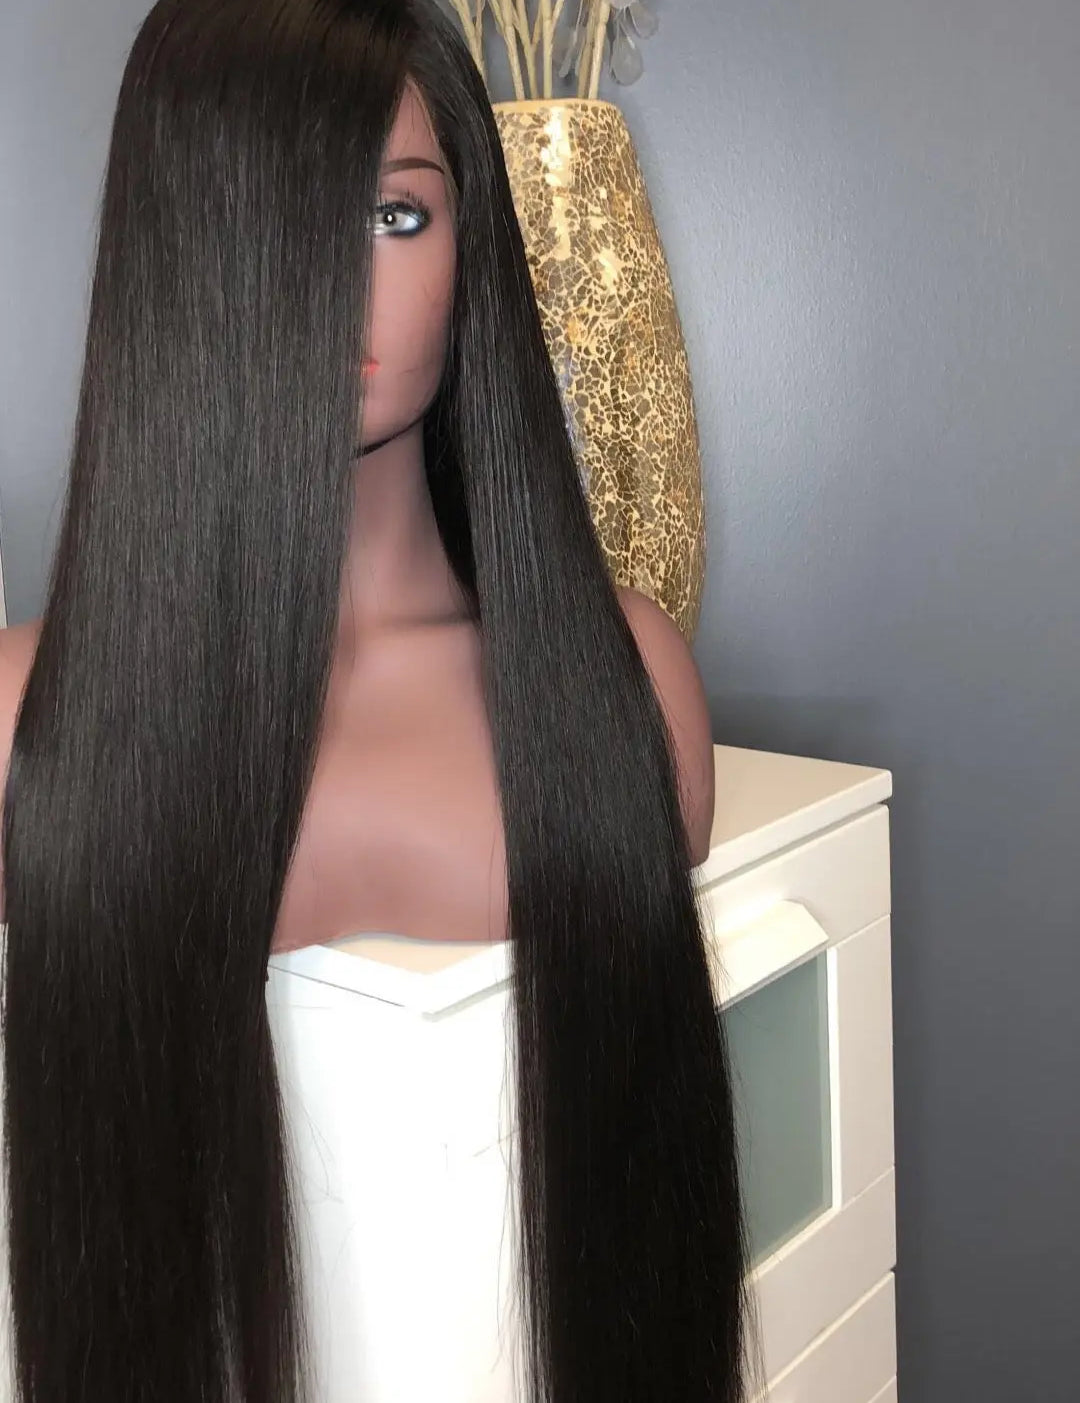 La' Wig - Exquisite Wigs Collection with 100% Human Hair. Your Premier Wig Salon Near You for Custom Colors, Balayage, and Wigs for Kids.